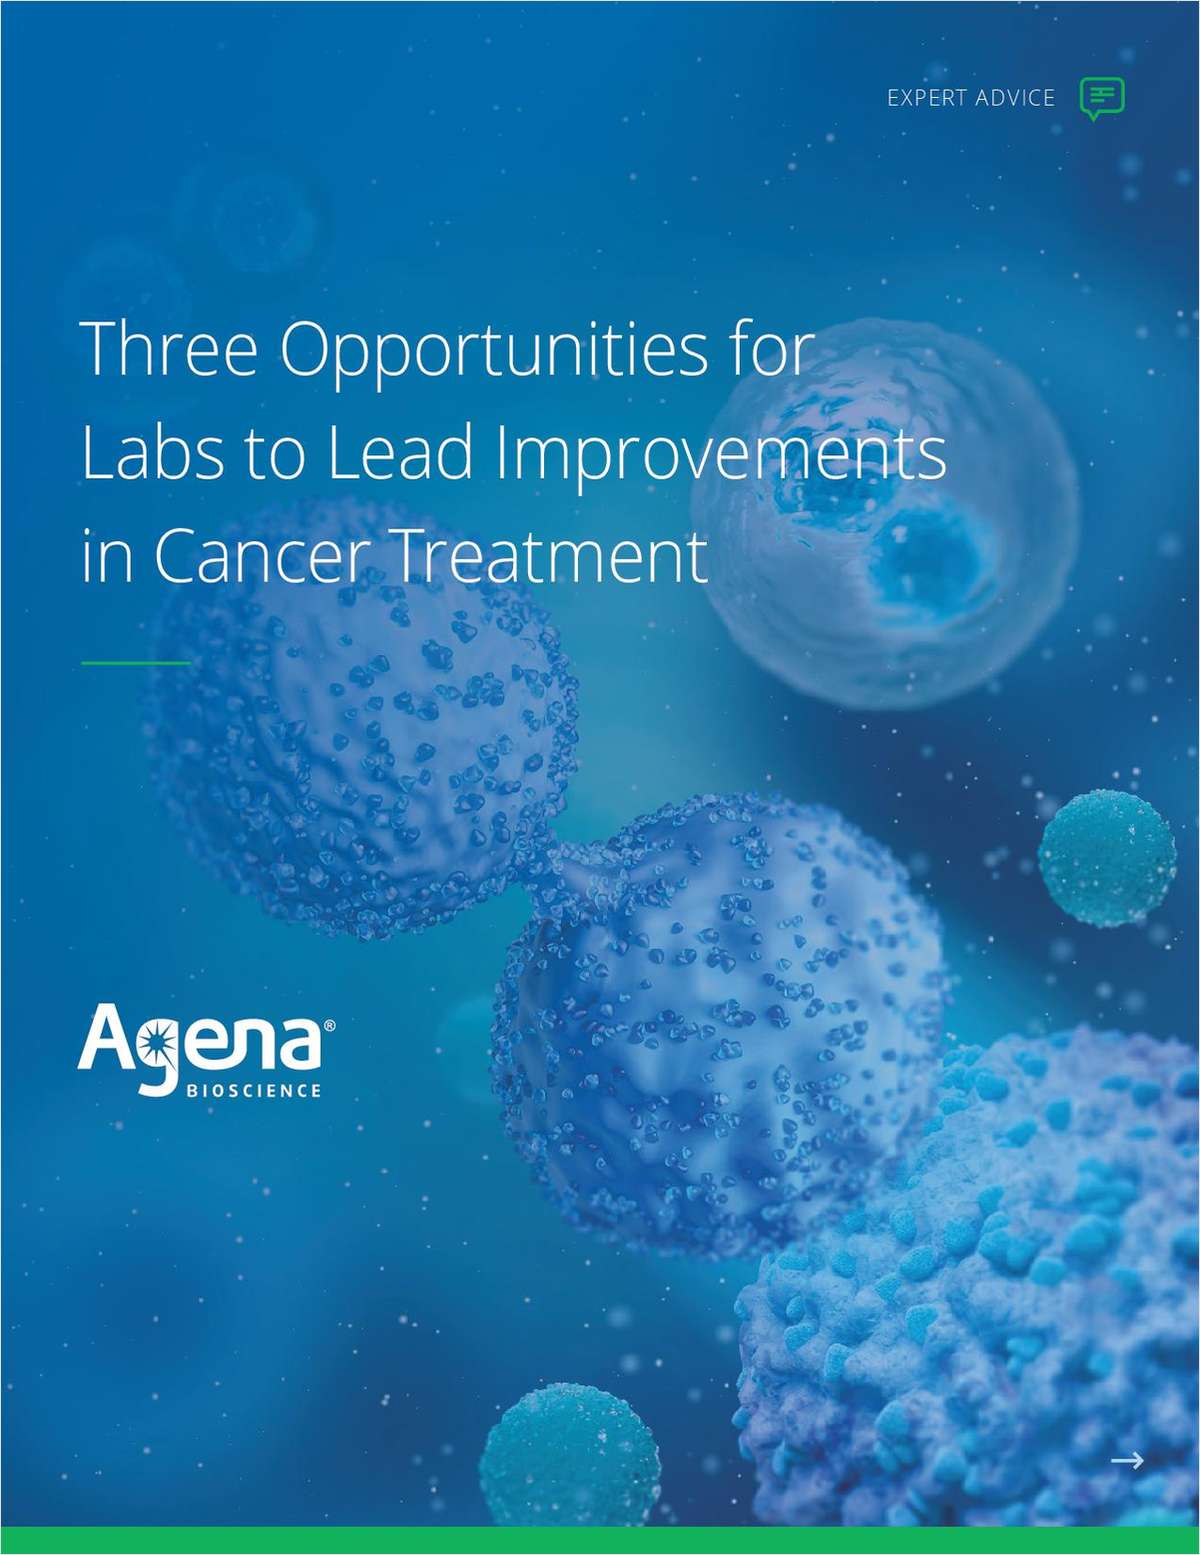 Three Opportunities for Labs to Lead Improvements in Cancer Treatment